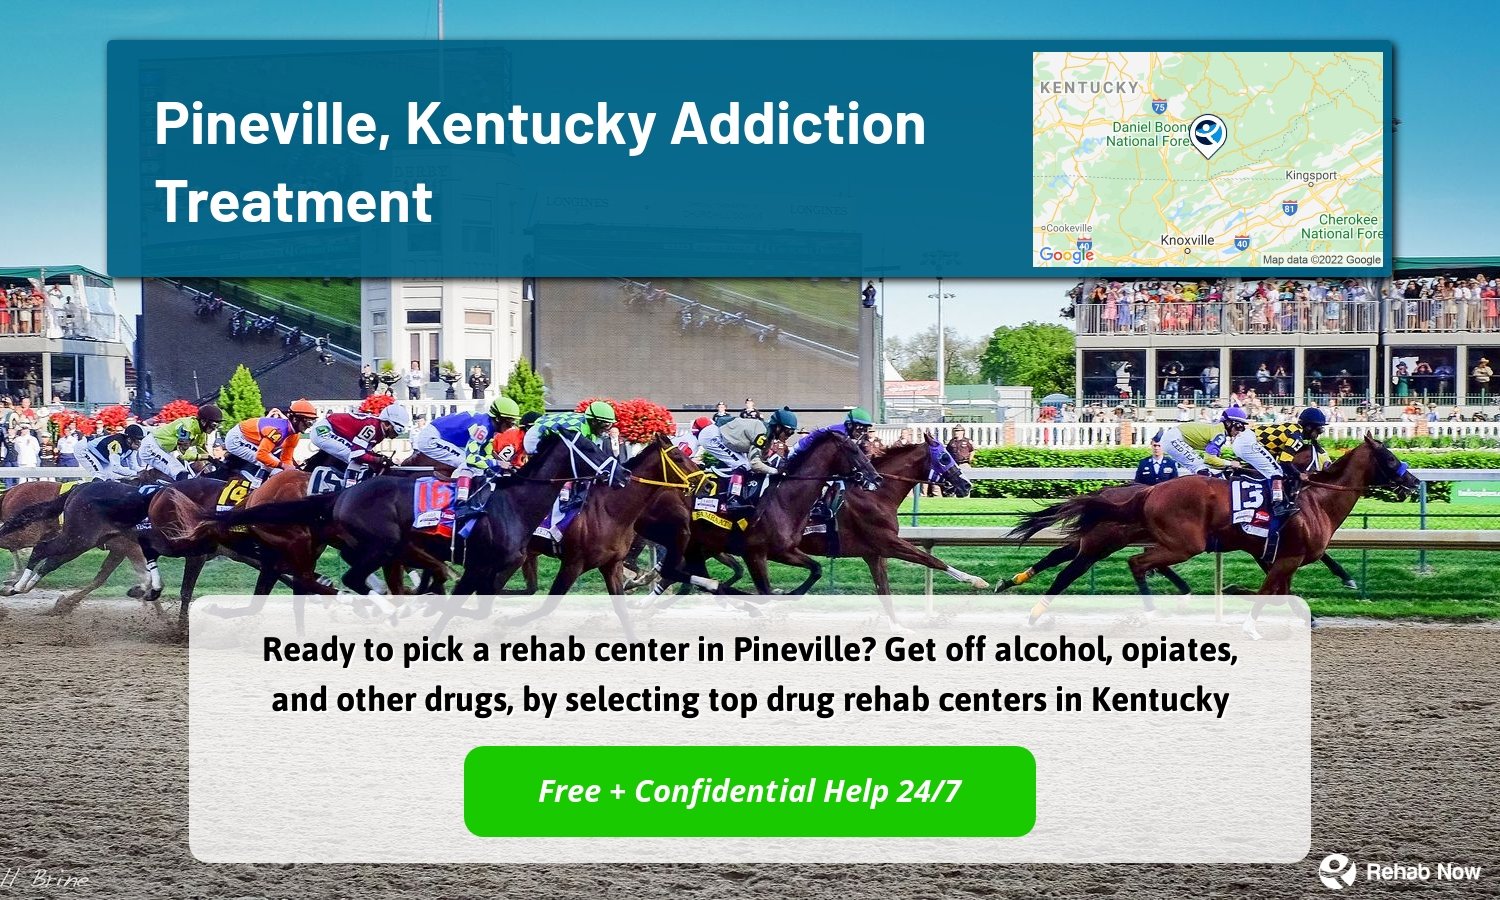 Ready to pick a rehab center in Pineville? Get off alcohol, opiates, and other drugs, by selecting top drug rehab centers in Kentucky